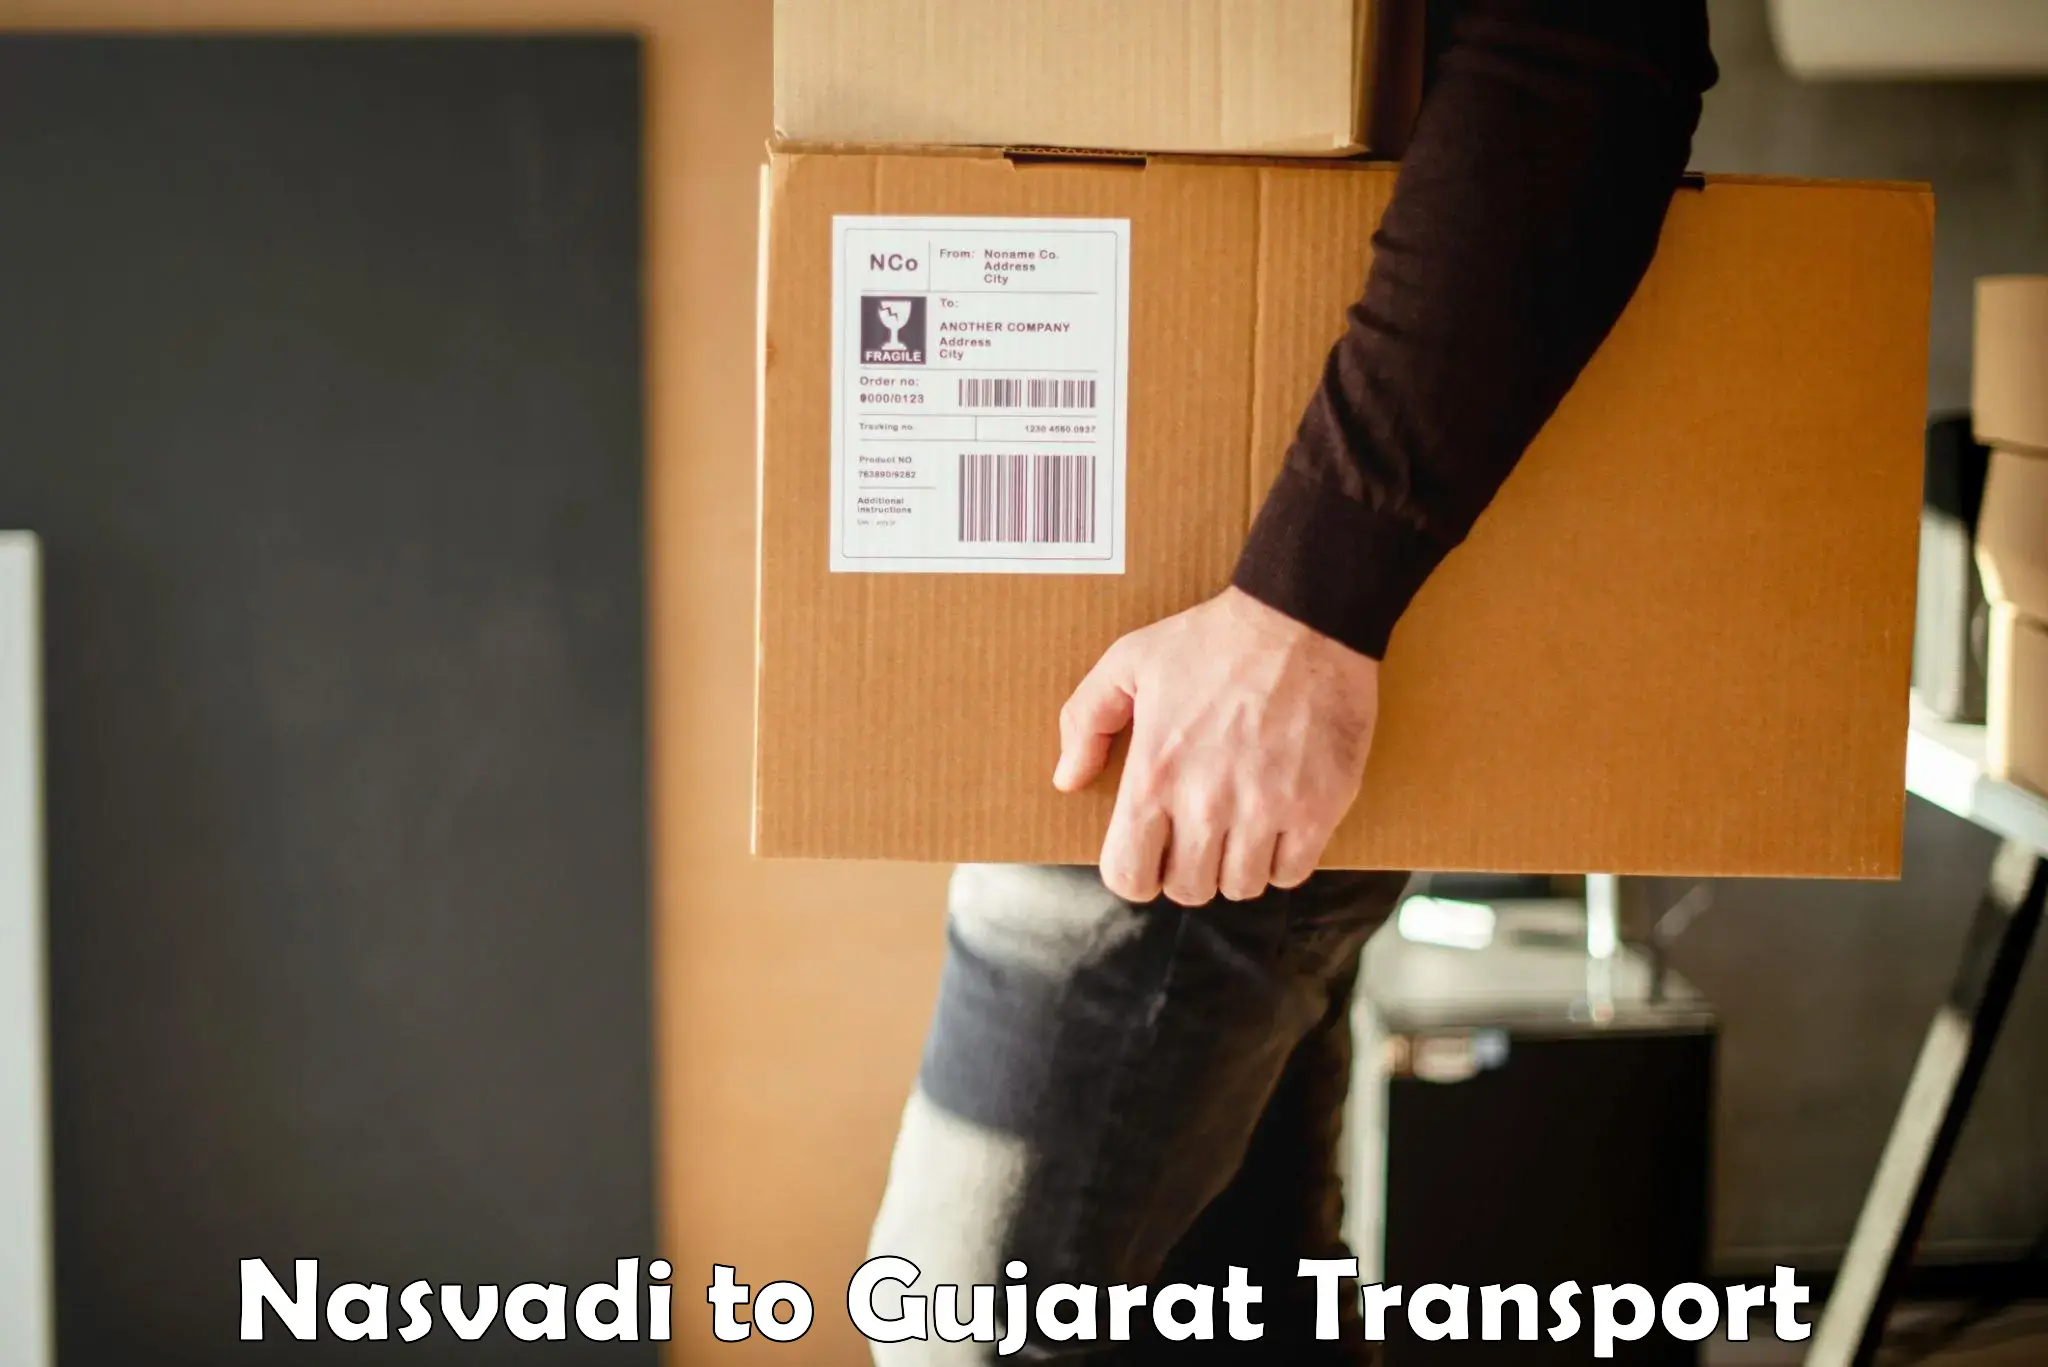 Parcel transport services Nasvadi to Songadh